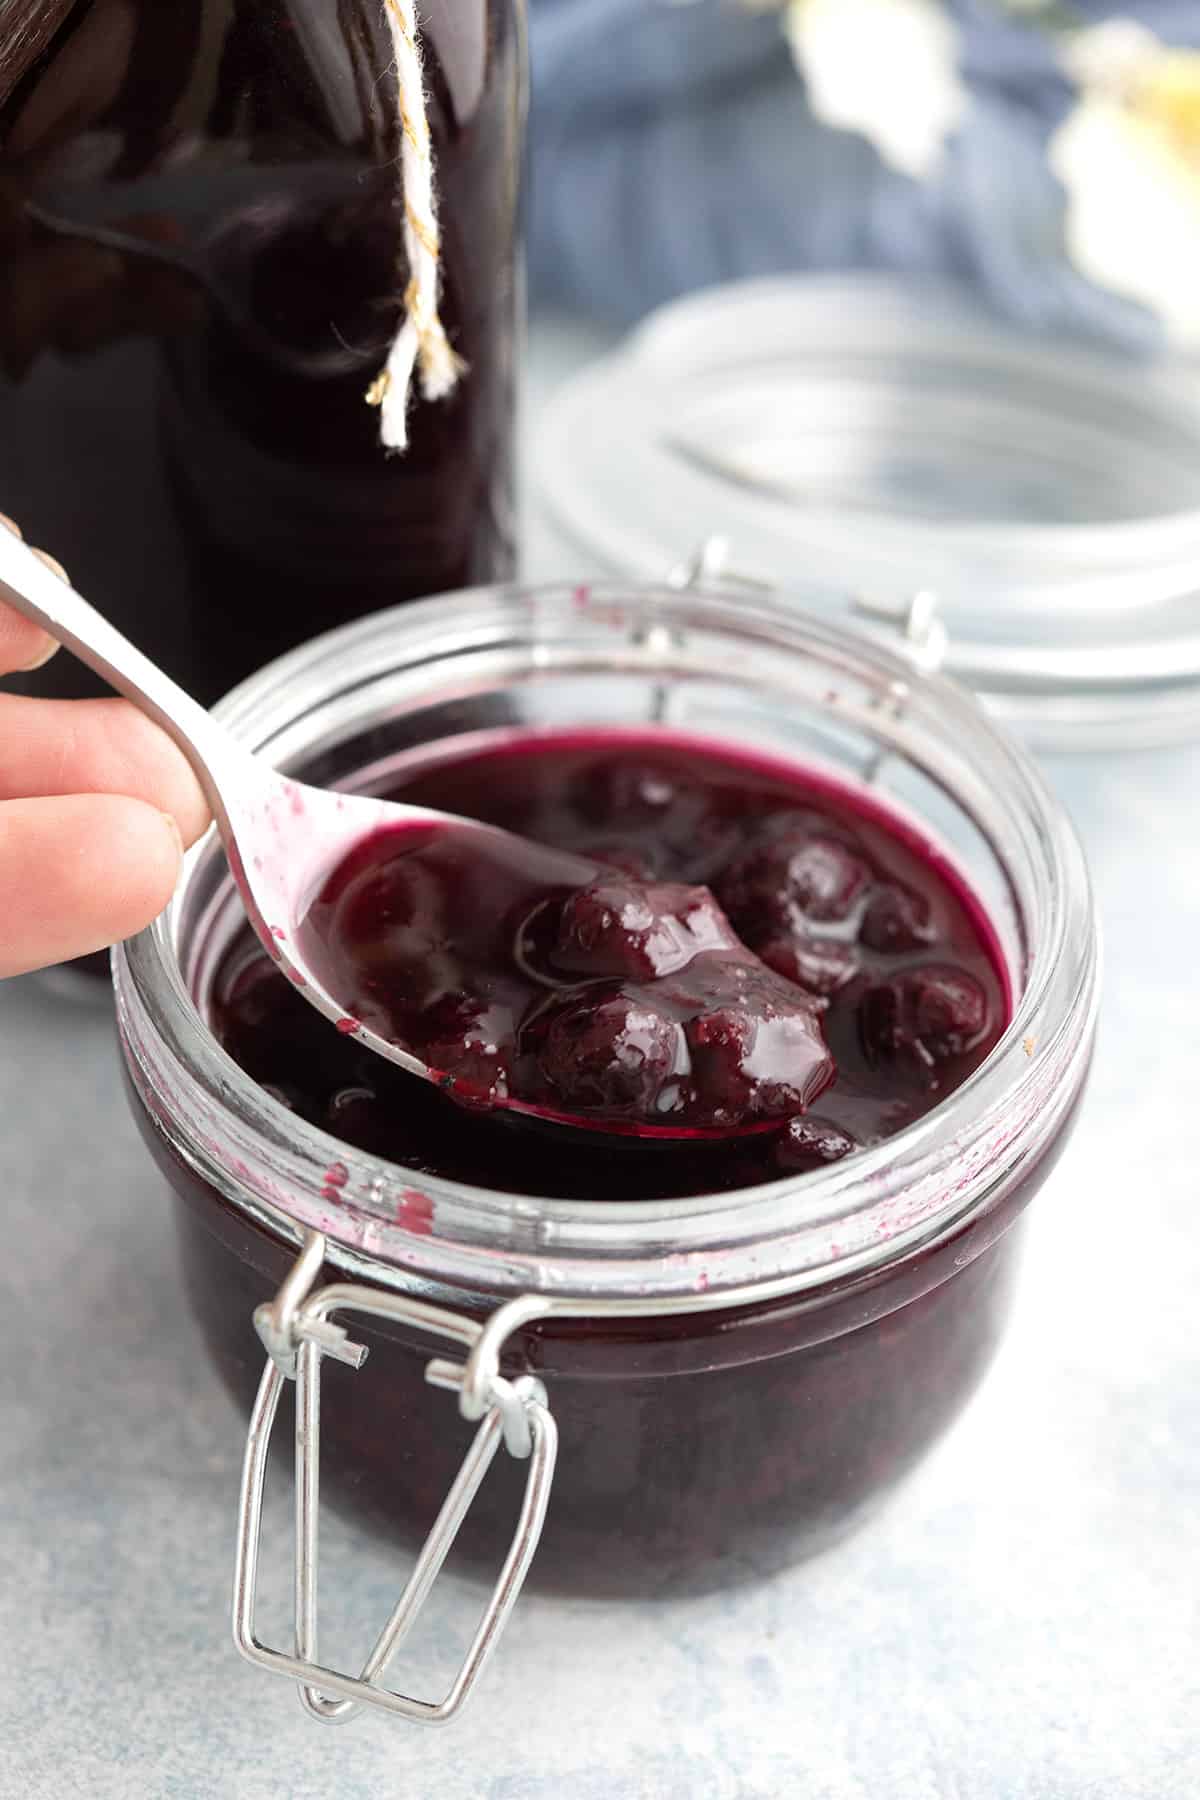 A spoon digging into a jar of blueberry syrup.